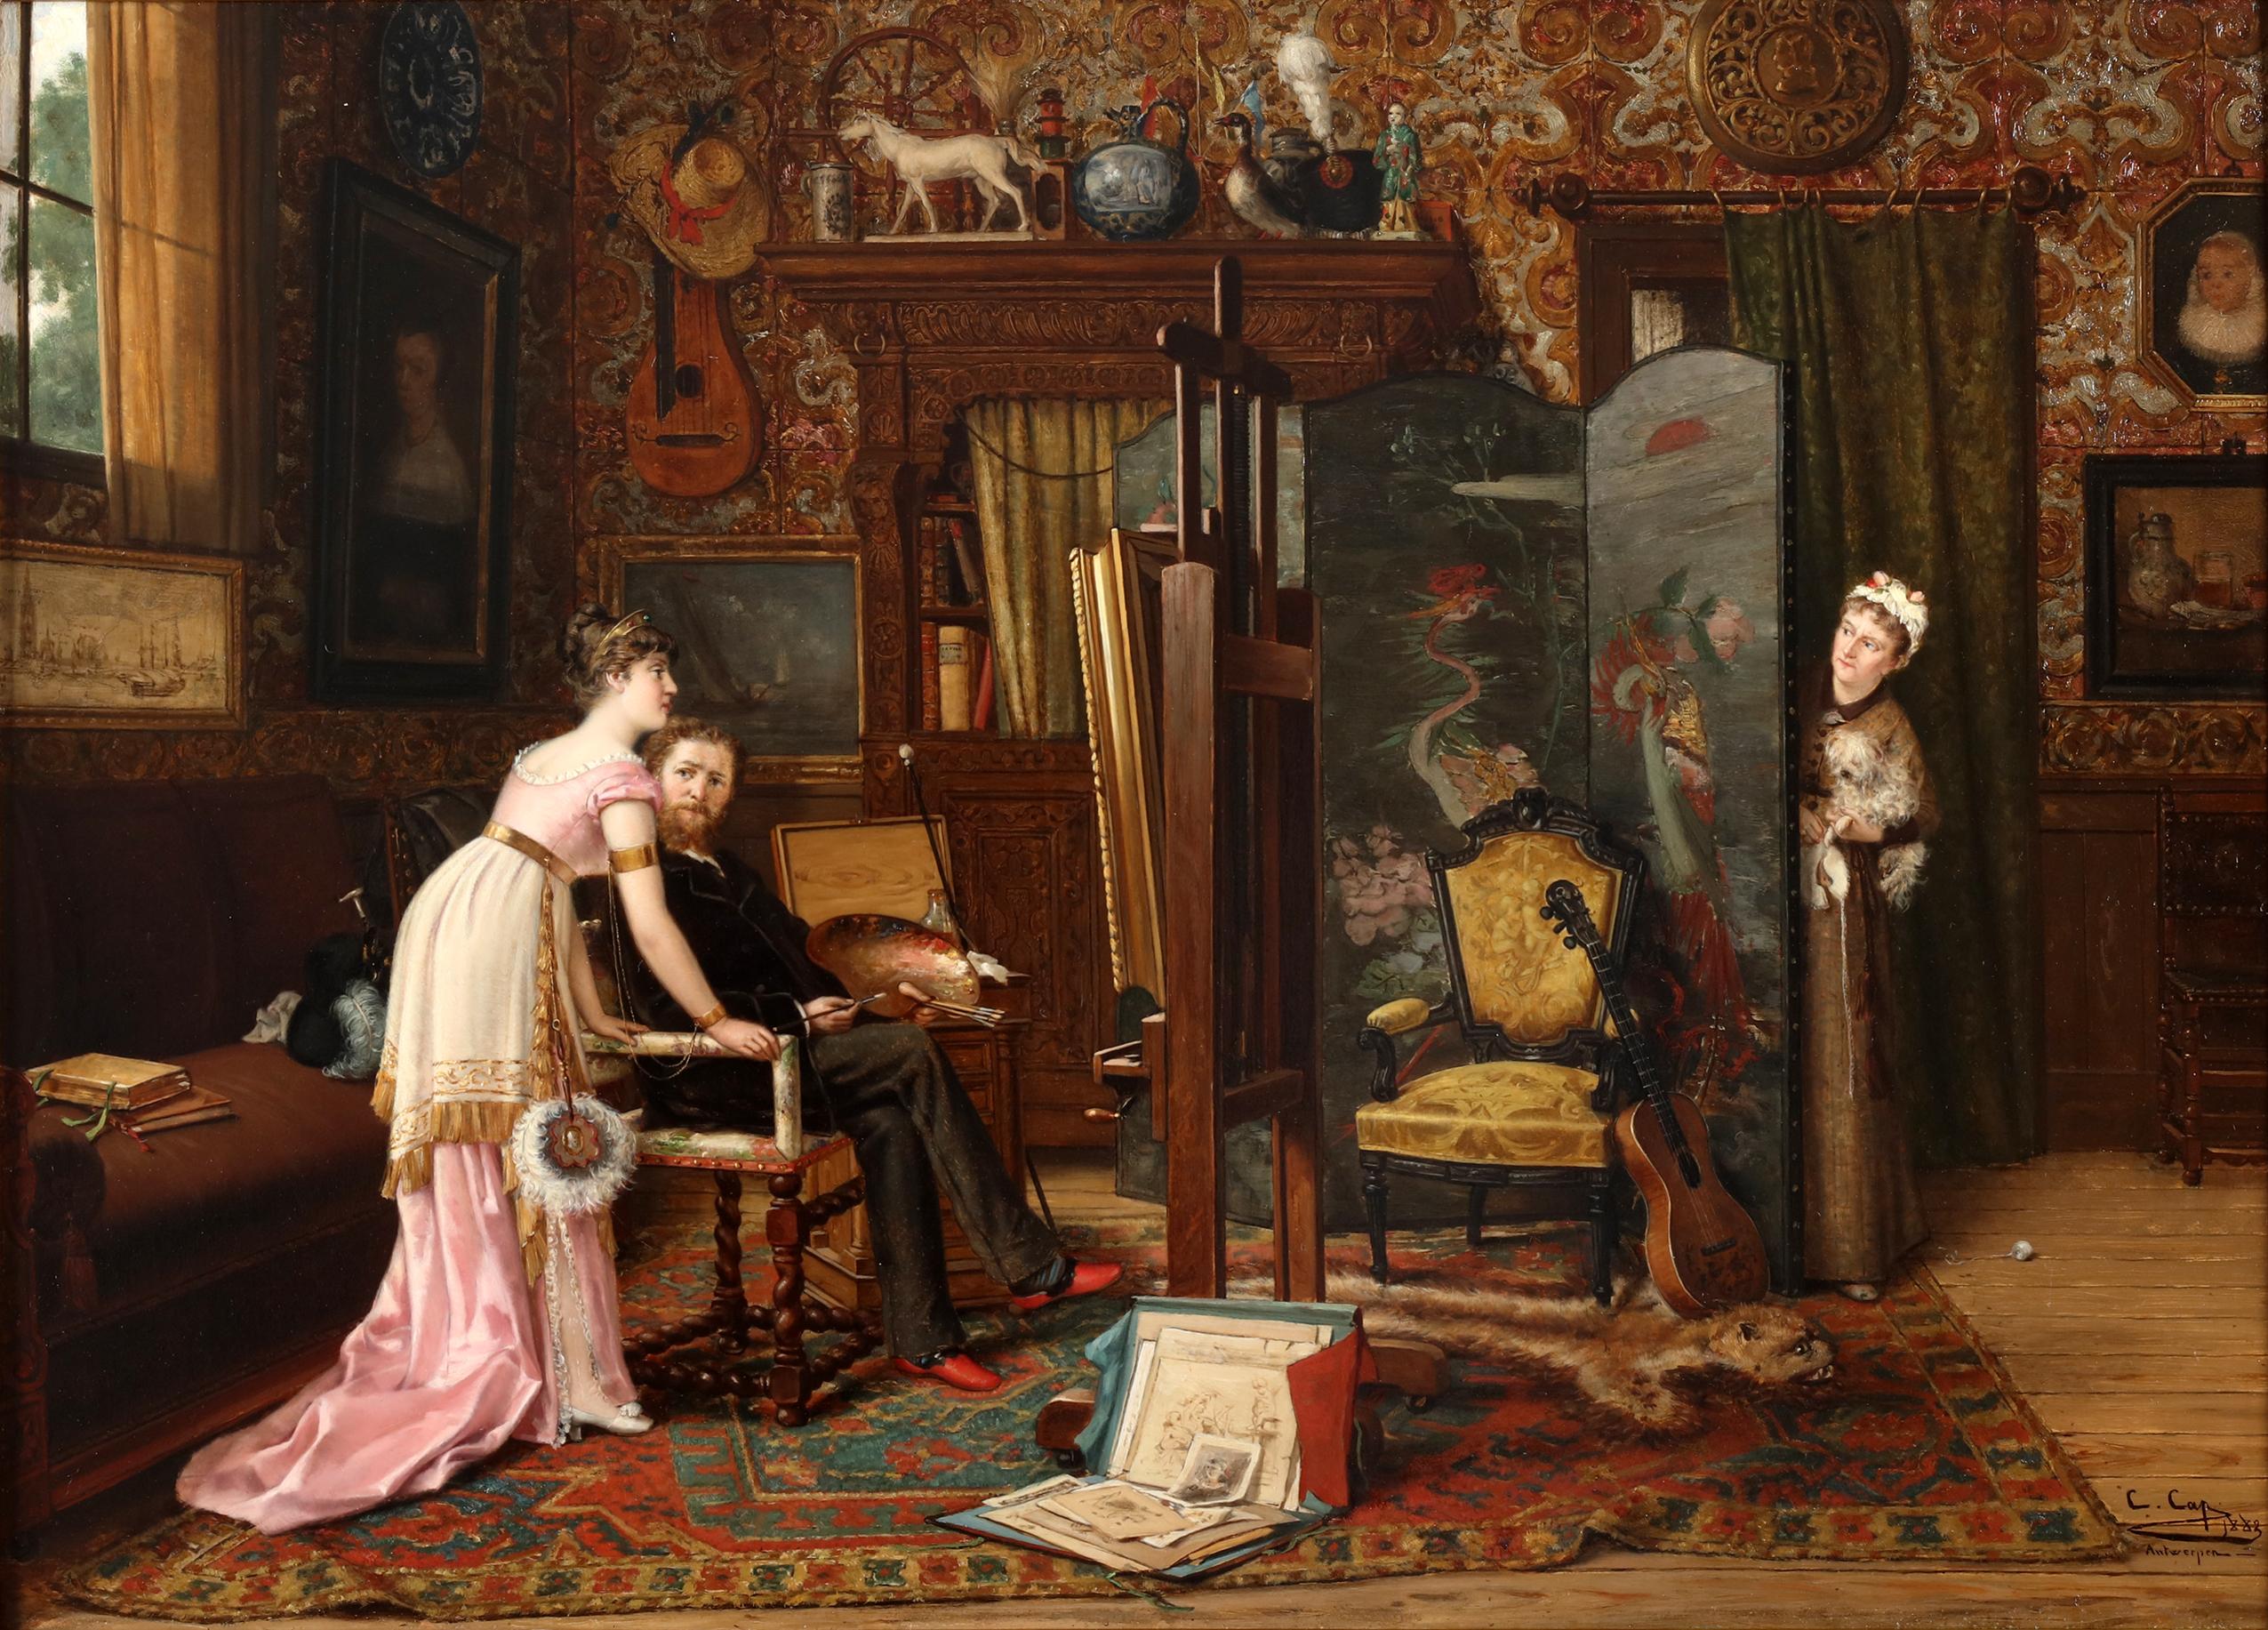 Oil on panel

Signed lower right: "C. Cap, 1882 Antwerpen"

Also signed on the back.


Constant Cap's "The artist at work" intricately weaves a narrative within a room brimming with creative artifacts and subtle human interactions. The scene is a